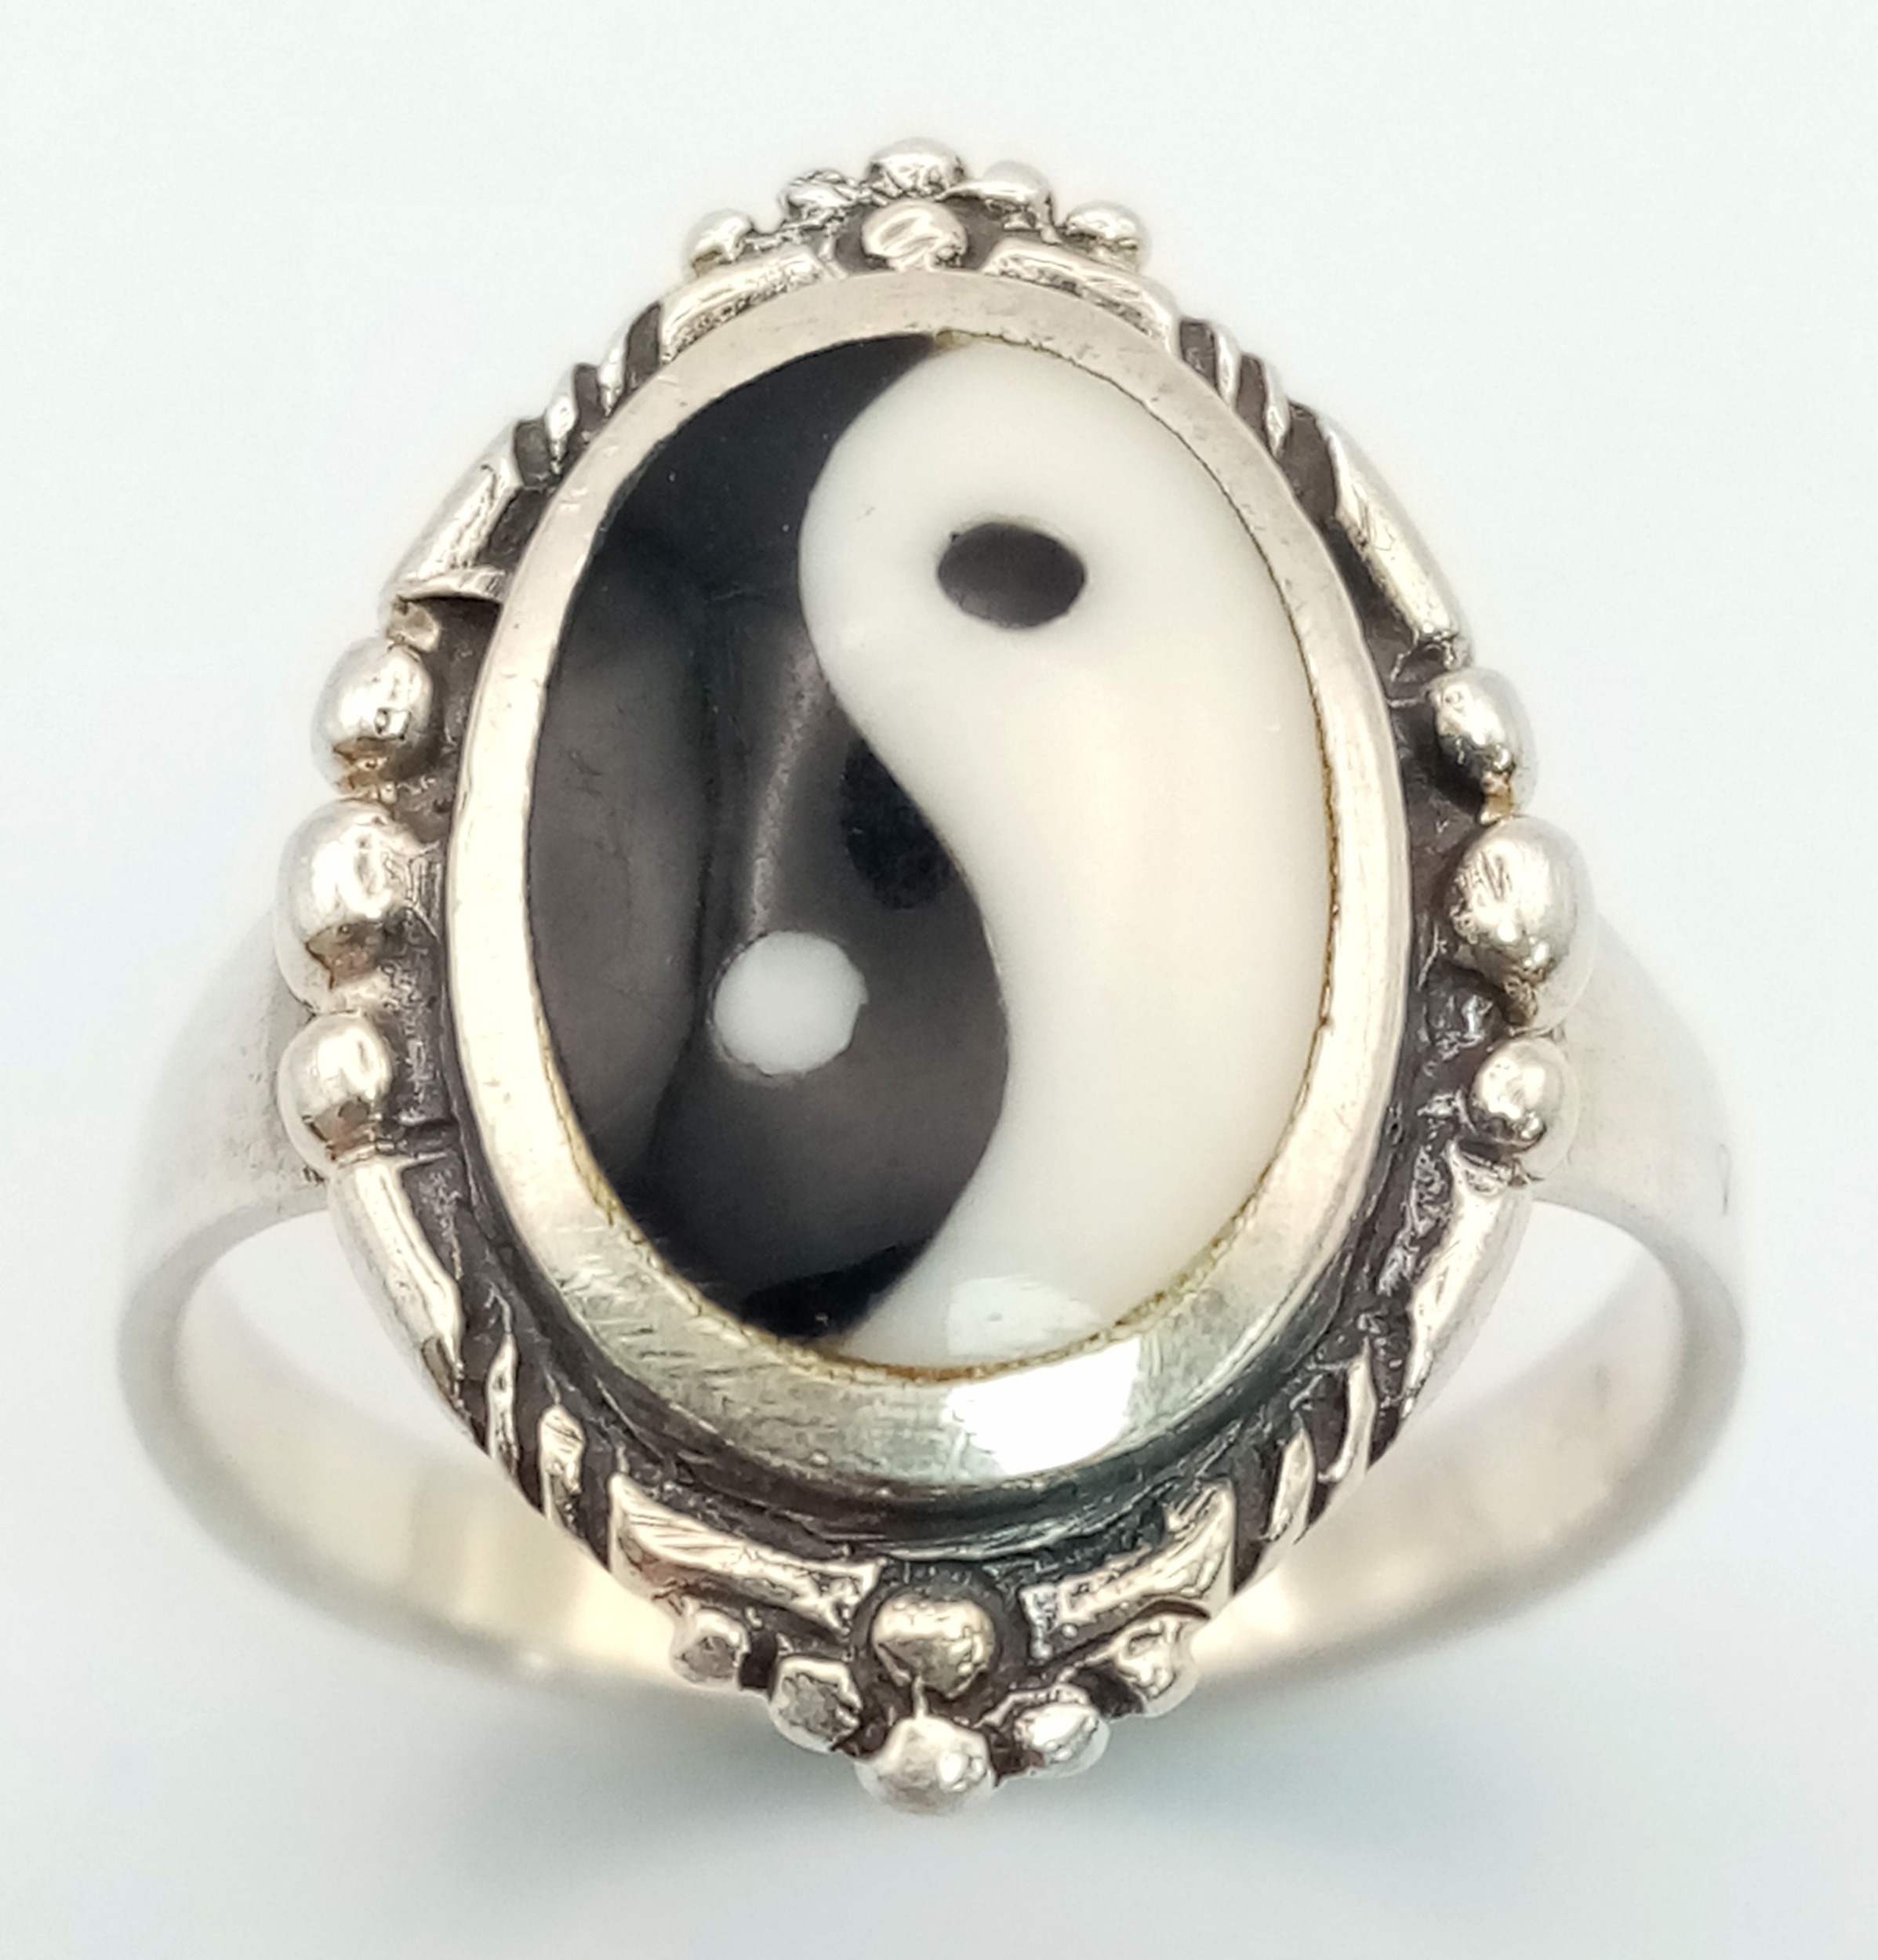 A Vintage Sterling Silver Yin-Yang Ring. Size N. Measures 2cm Long and the Crown and Weighs 3.5